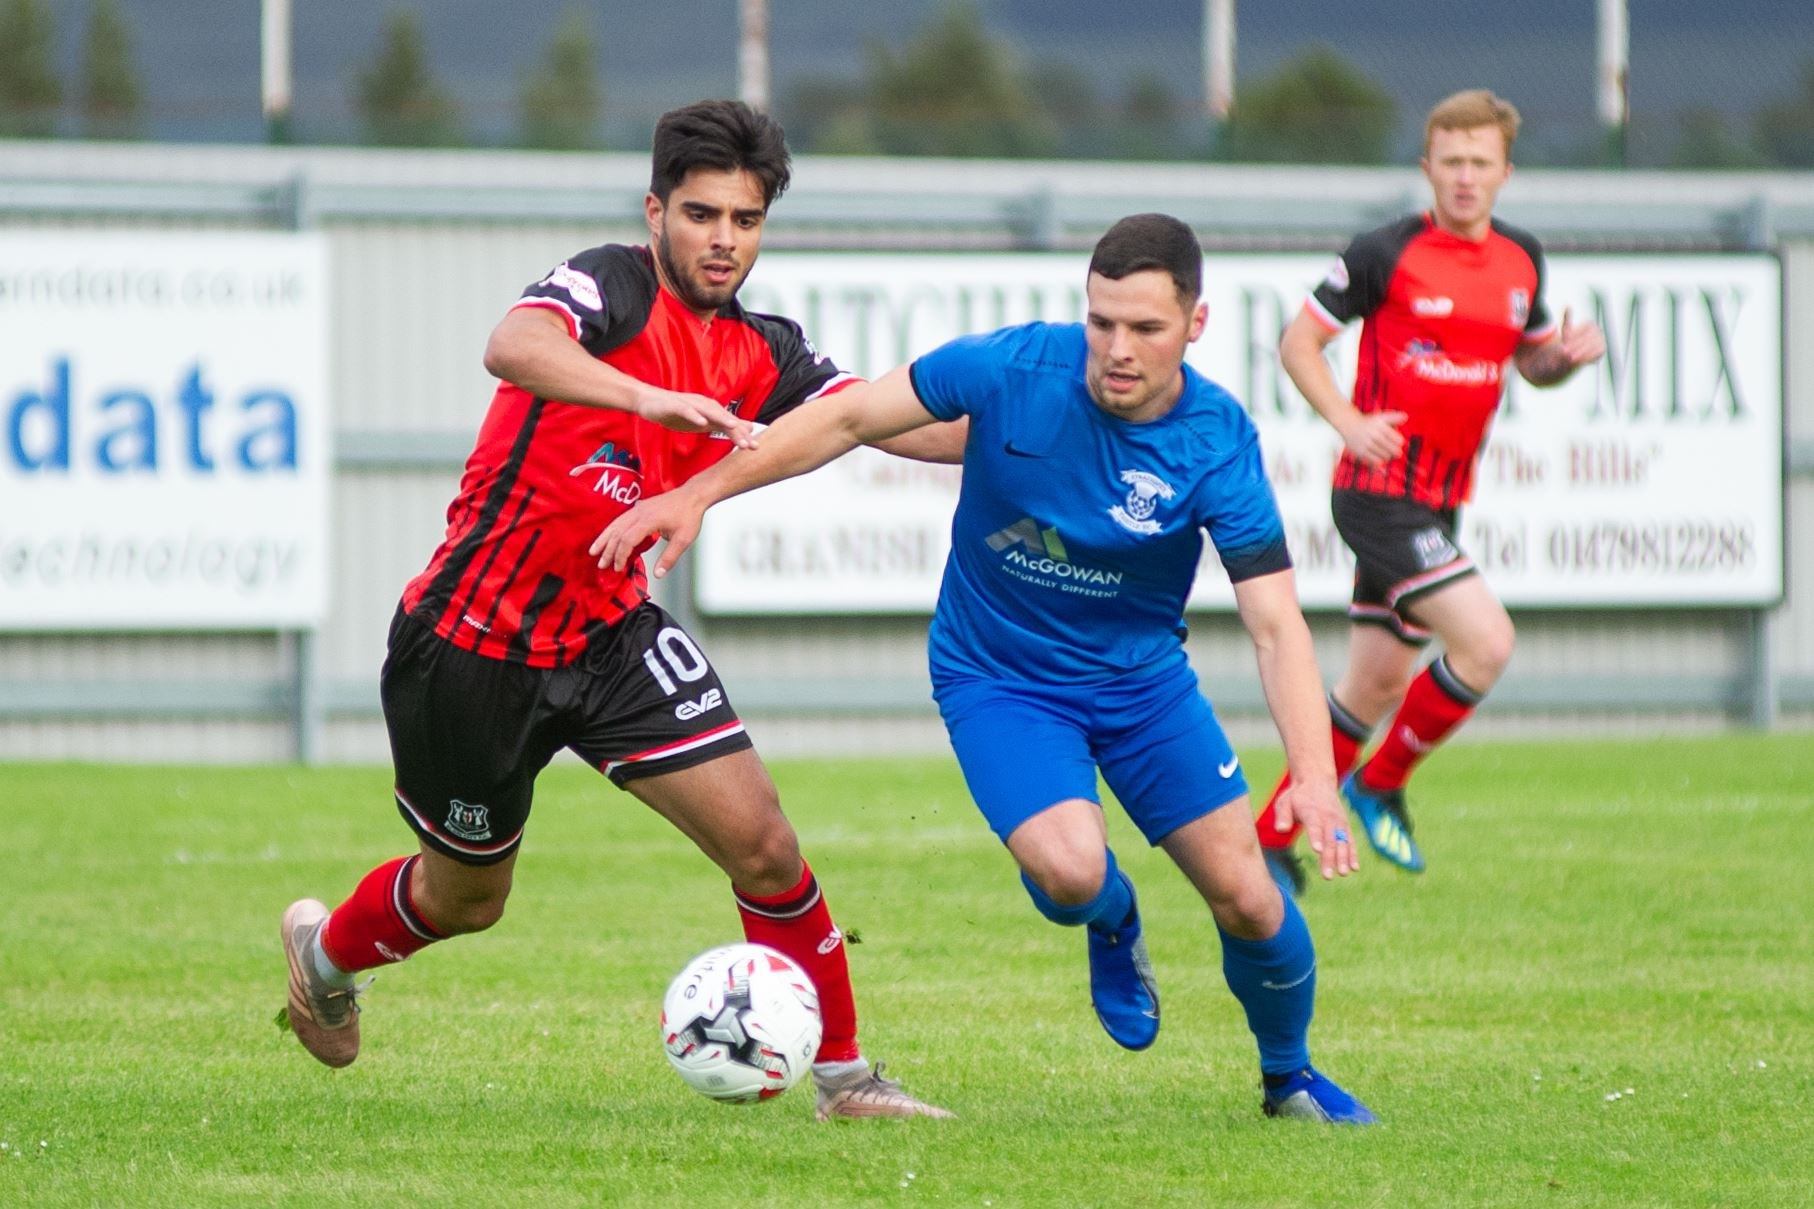 Strathspey Thistle's Andrew Skinner (right) will miss out on vital game after being sent off at the weekend.